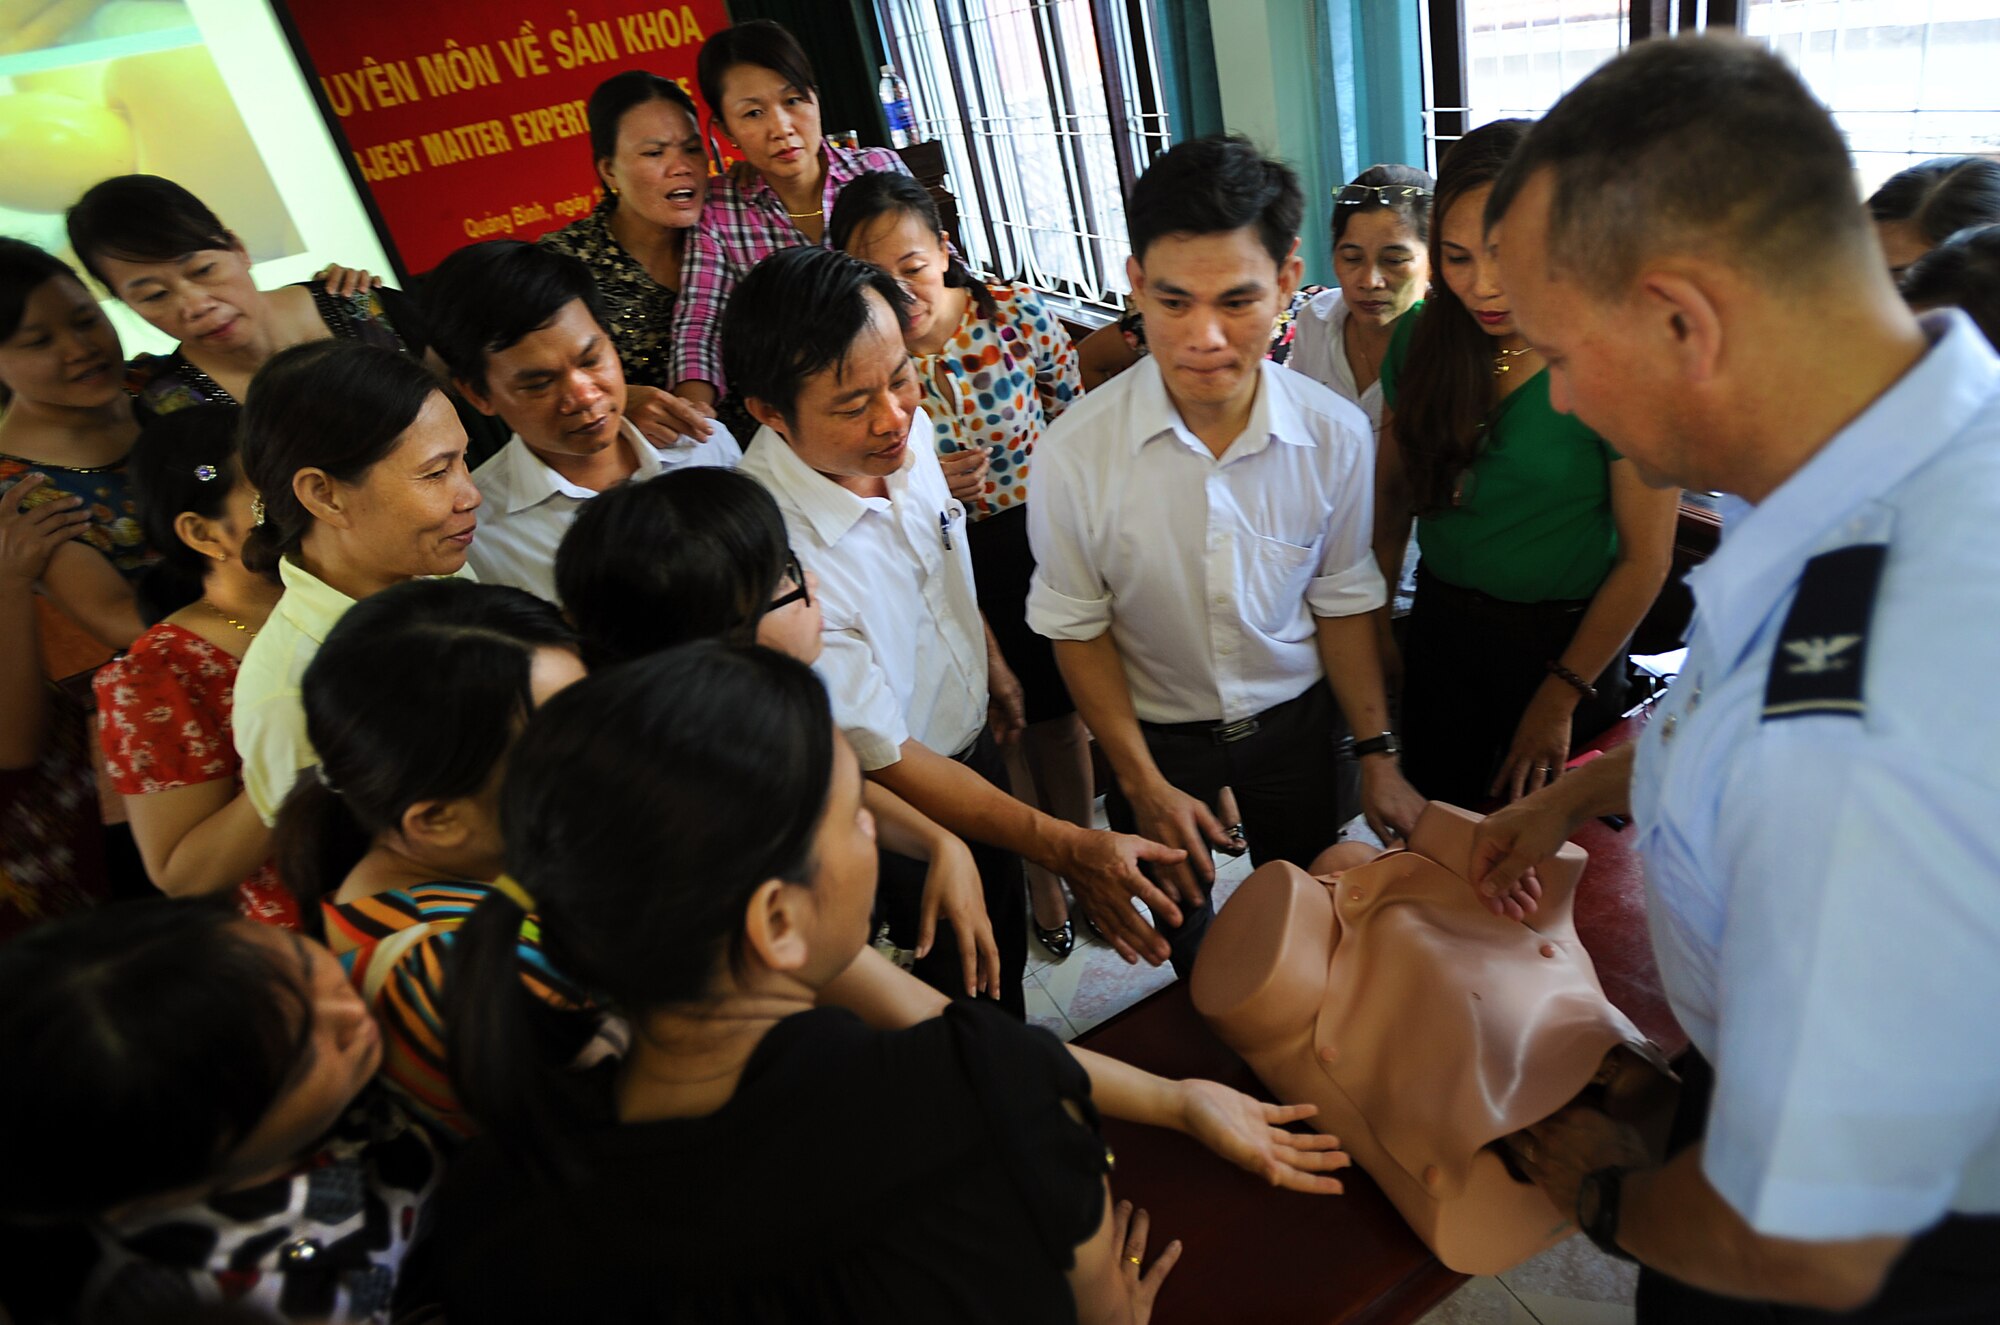 U.S. Air Force Col. John Fischer, an obstetrics and gynecology doctor at the Walter Reed National Military Medical Center Bethesda, Maryland, teaches the hands-on portion of the Prenatal/Obstetrics Emergency Subject Matter Expert Exchange to midwives and physicians from the local community in Dong Hoi, Quang Binh Province, as part of Operation Pacific Angel, June 10, 2013. Operation PACANGEL is a joint and combined humanitarian assistance exercise held in various countries several times a year and includes medical, dental, optometry, engineering programs and a variety of SMEEs. (U.S. Air Force photo by Staff Sgt. Sara Csurilla)